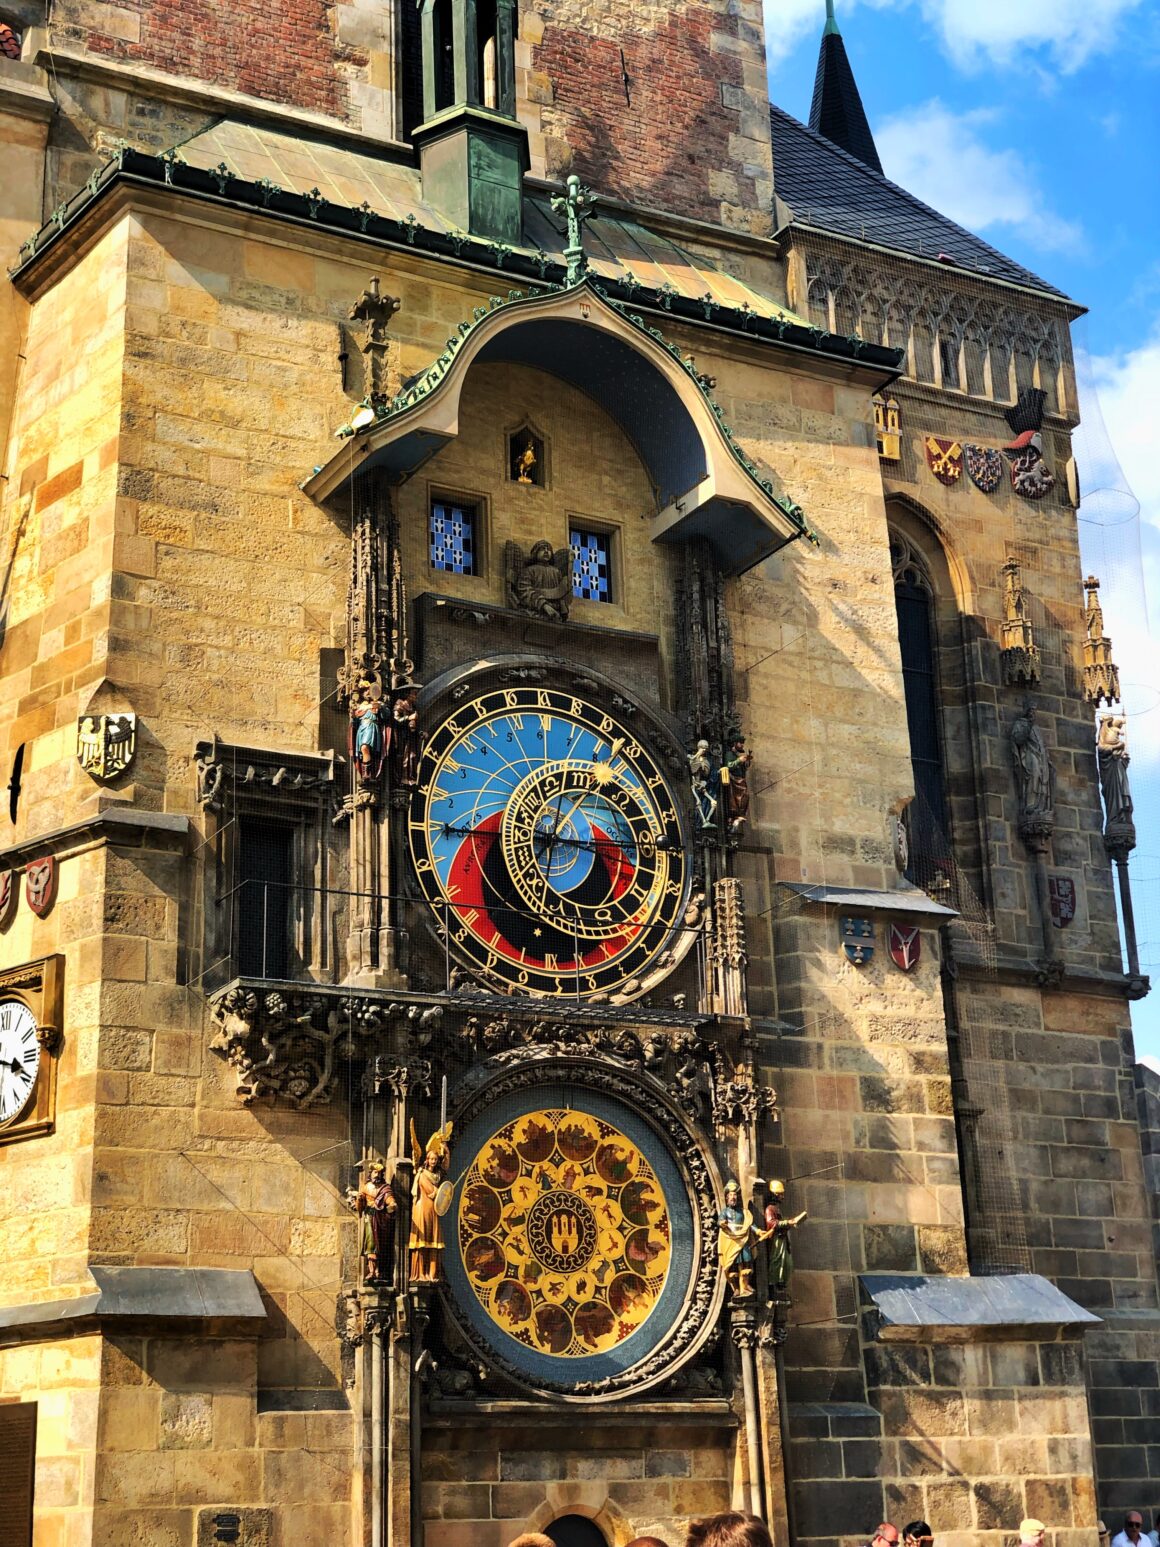 Prague's famous astrological clock in old town square, one of the best things to do in Prague